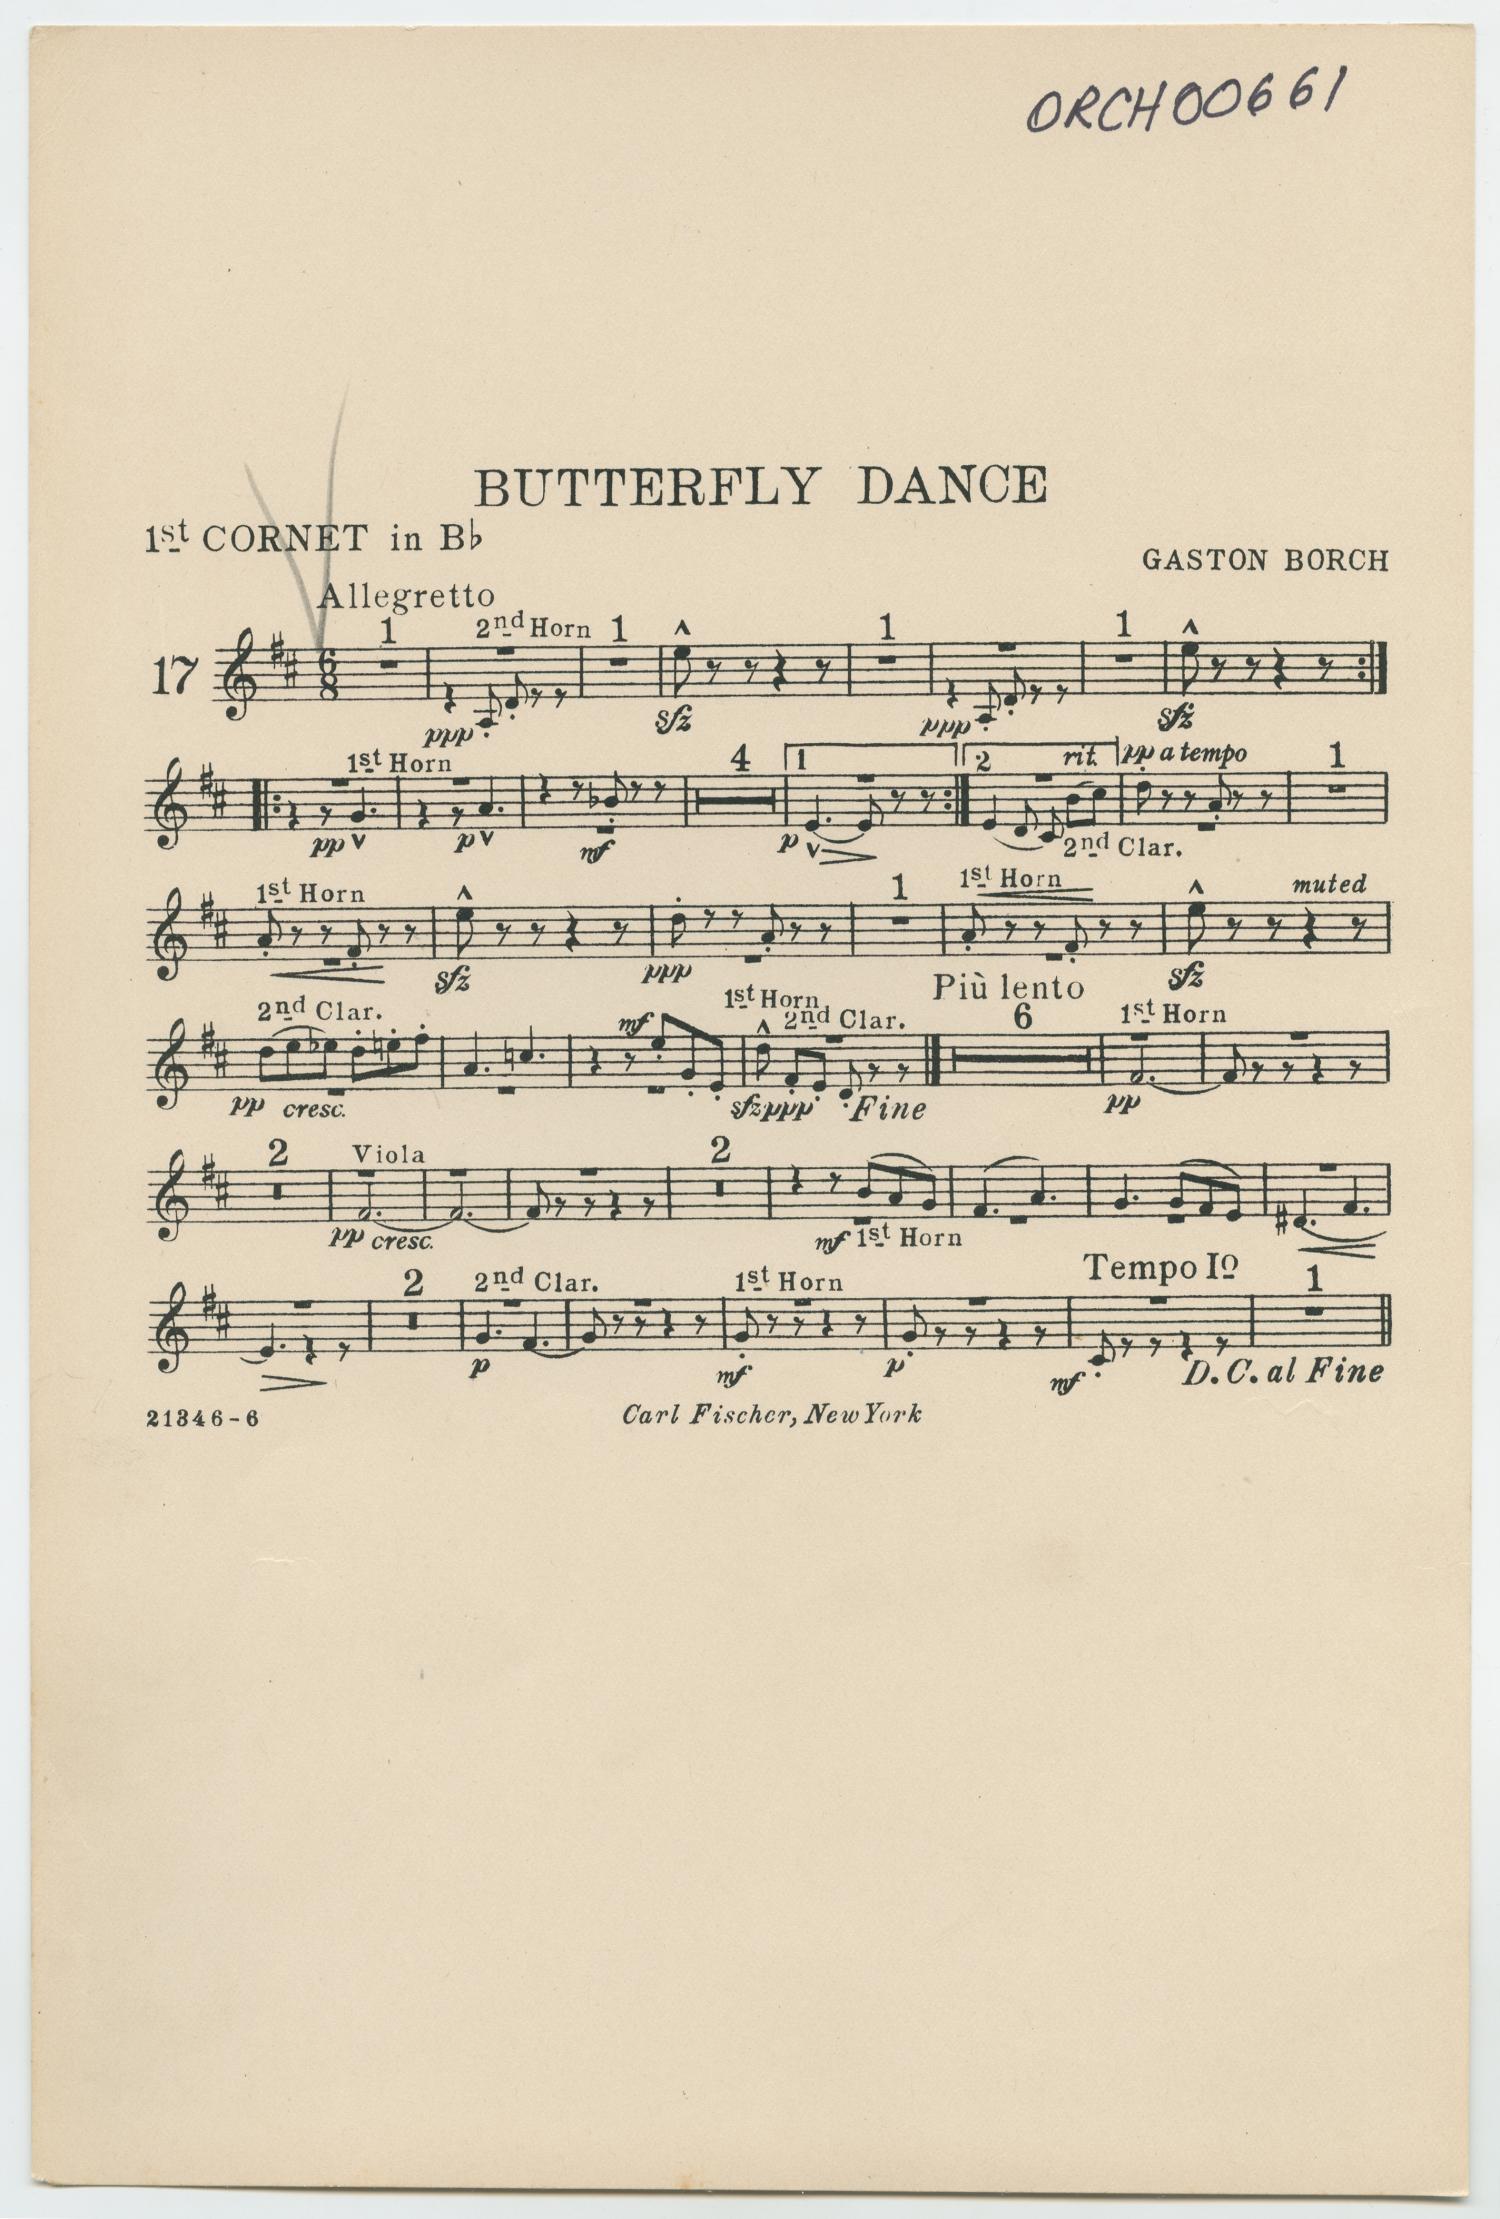 Butterfly Dance: Cornet 1 in B♭ Part
                                                
                                                    [Sequence #]: 1 of 2
                                                